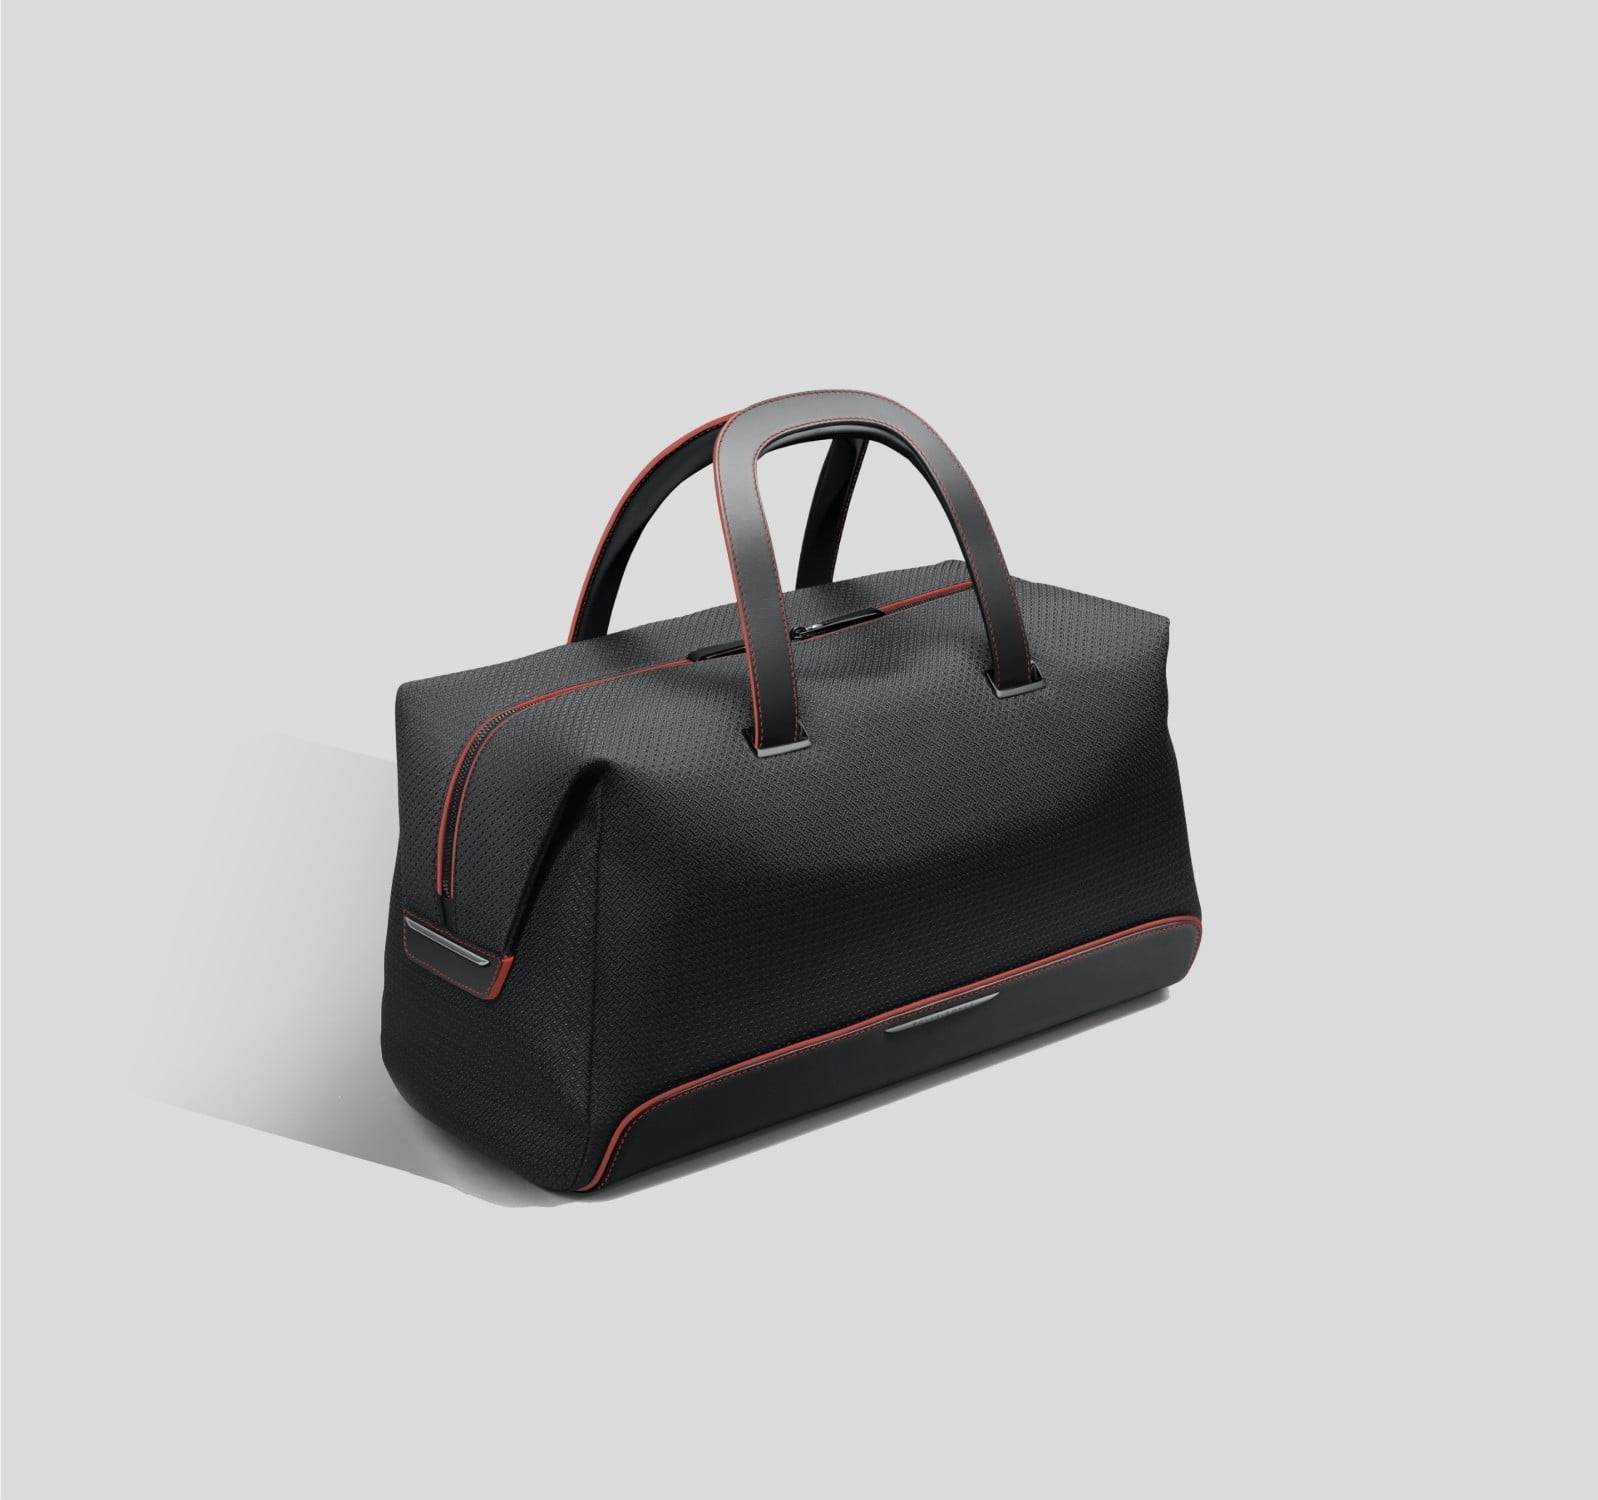 Rolls-Royce Black Badge Escapism Luggage Collection